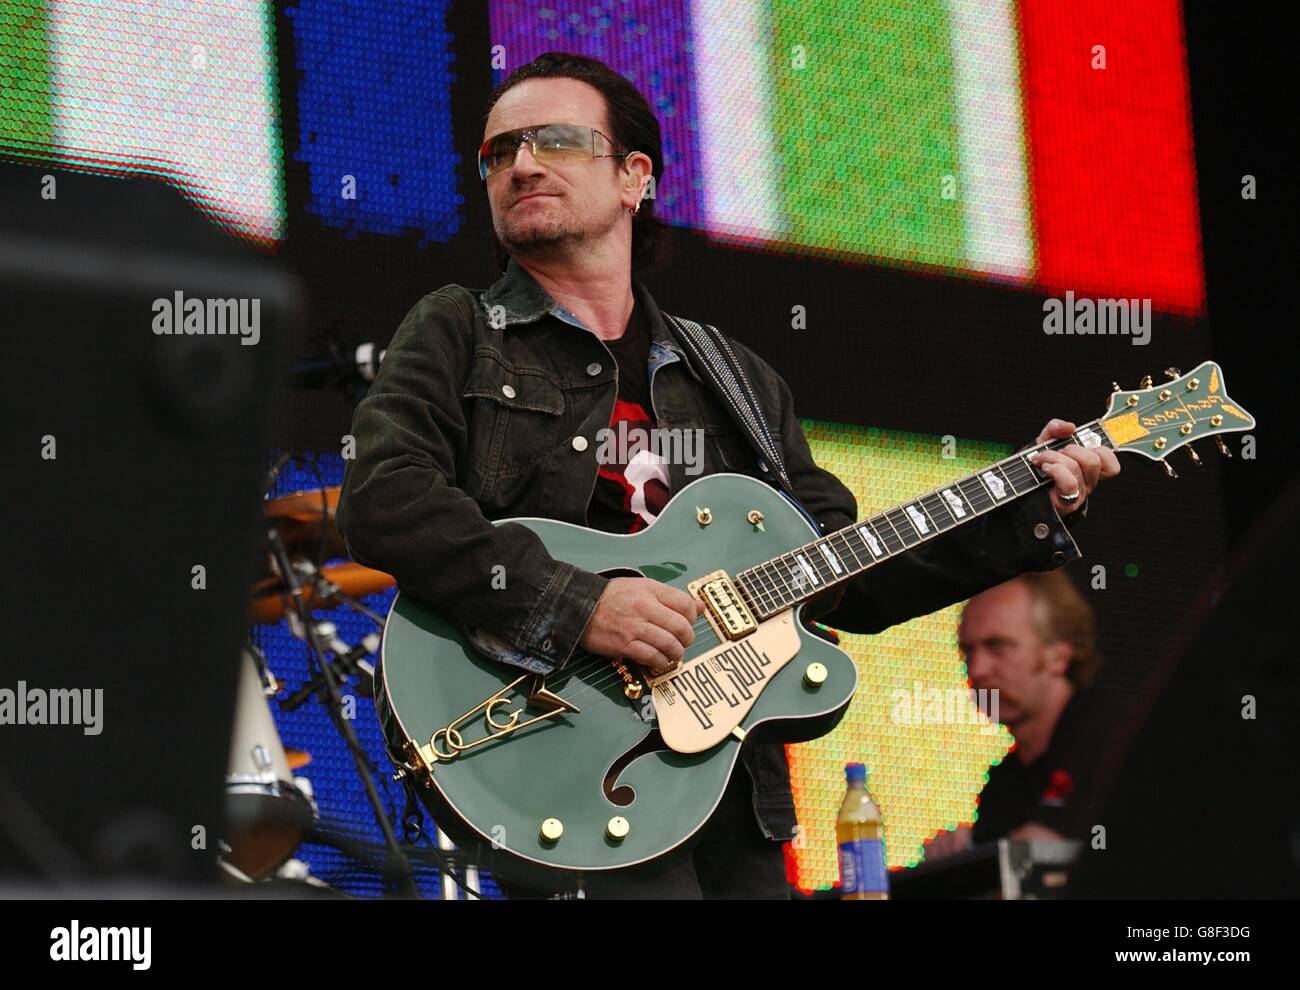 Live 8 Concert, Hyde Park, London. Bono of U2 perform on stage. Stock Photo